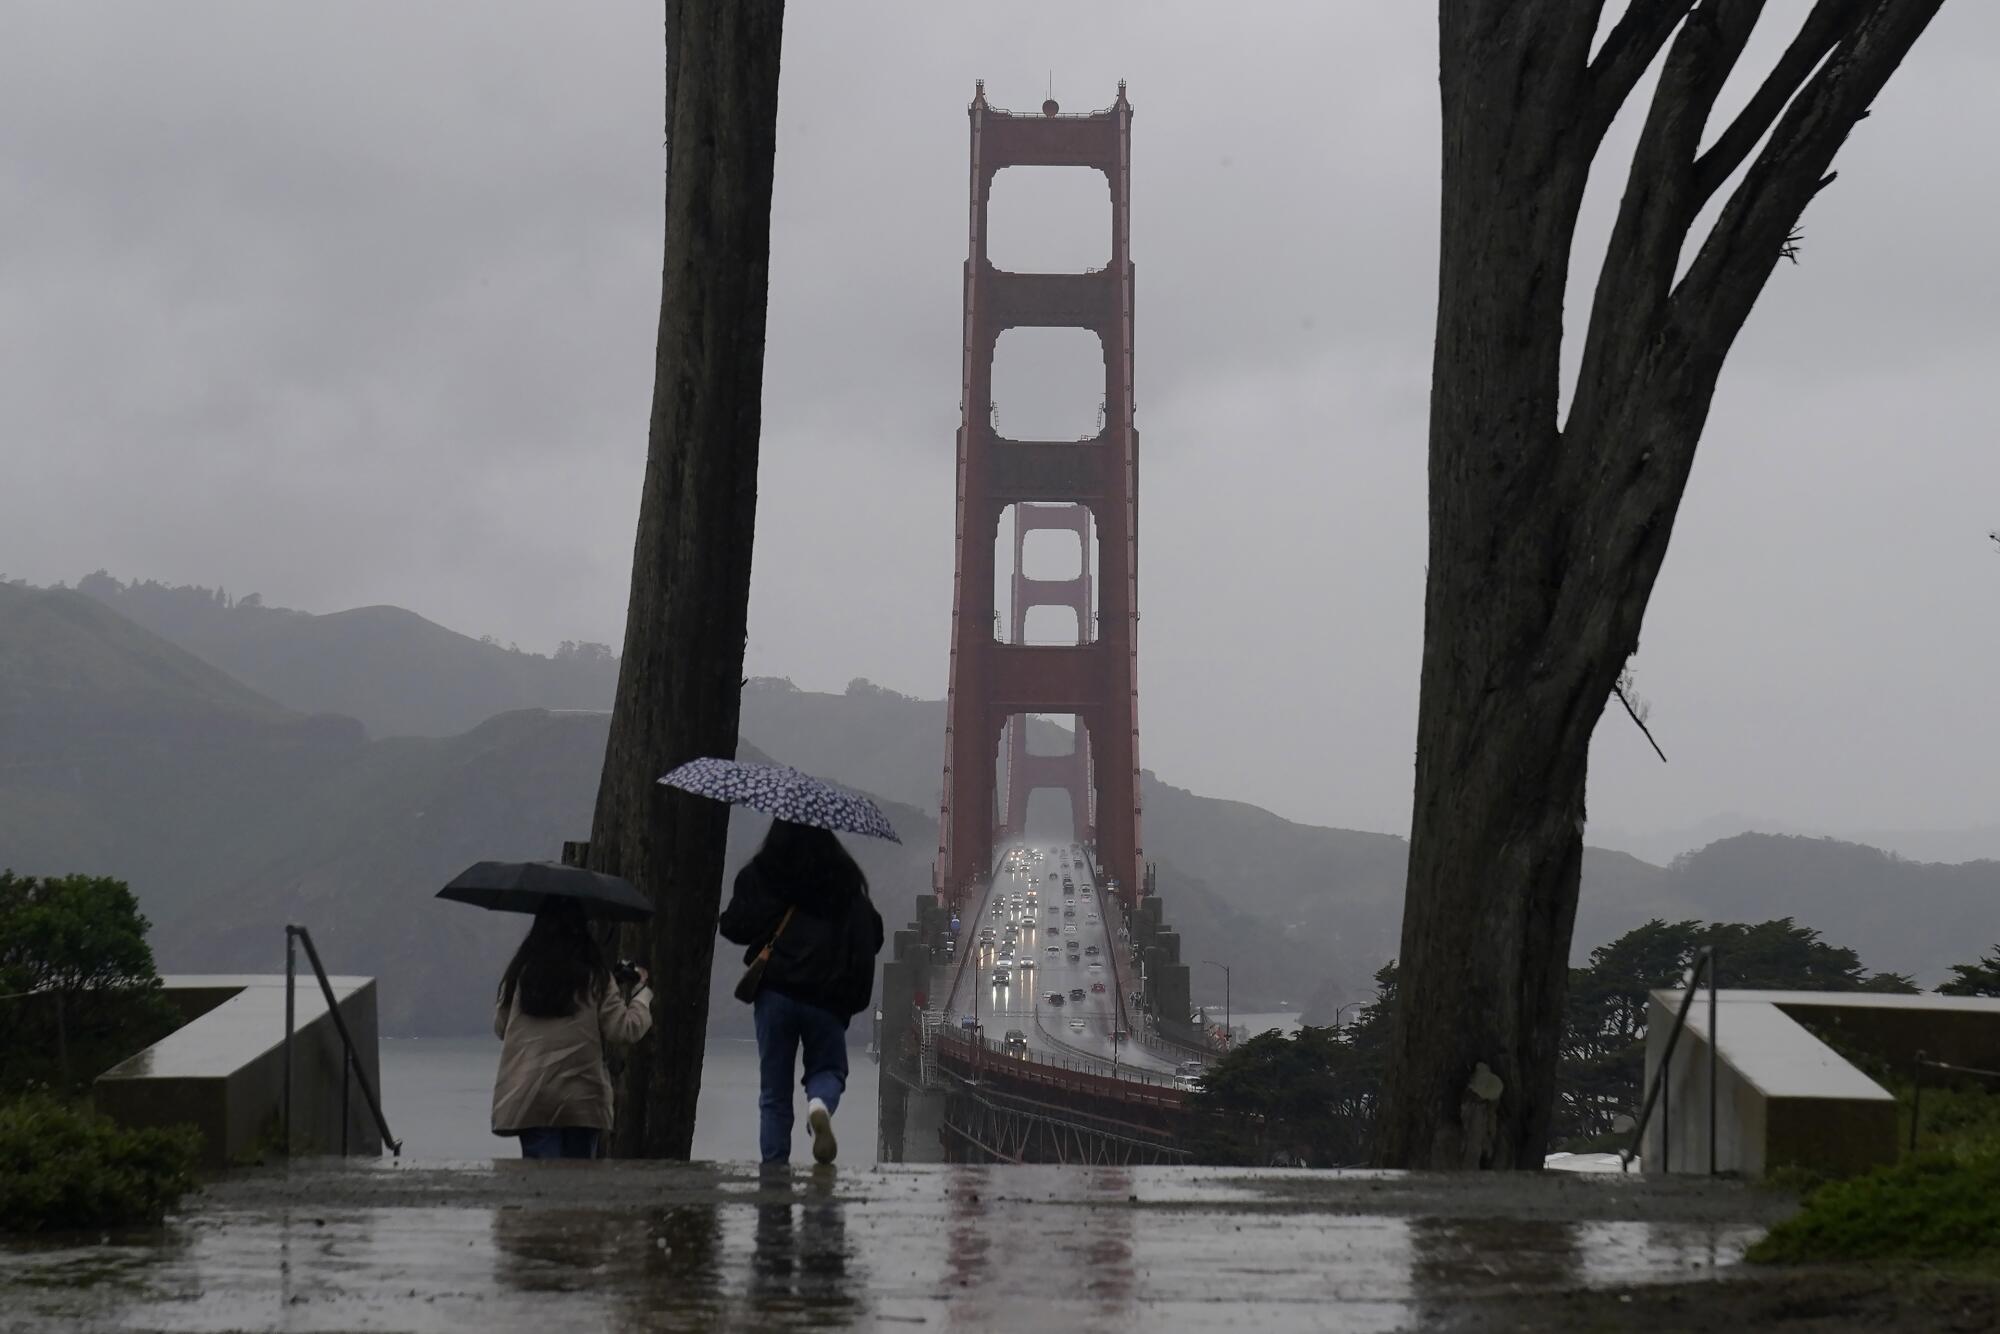 Two people hold umbrellas as the walk in the rain. The Golden Gate Bridge rises in the background.